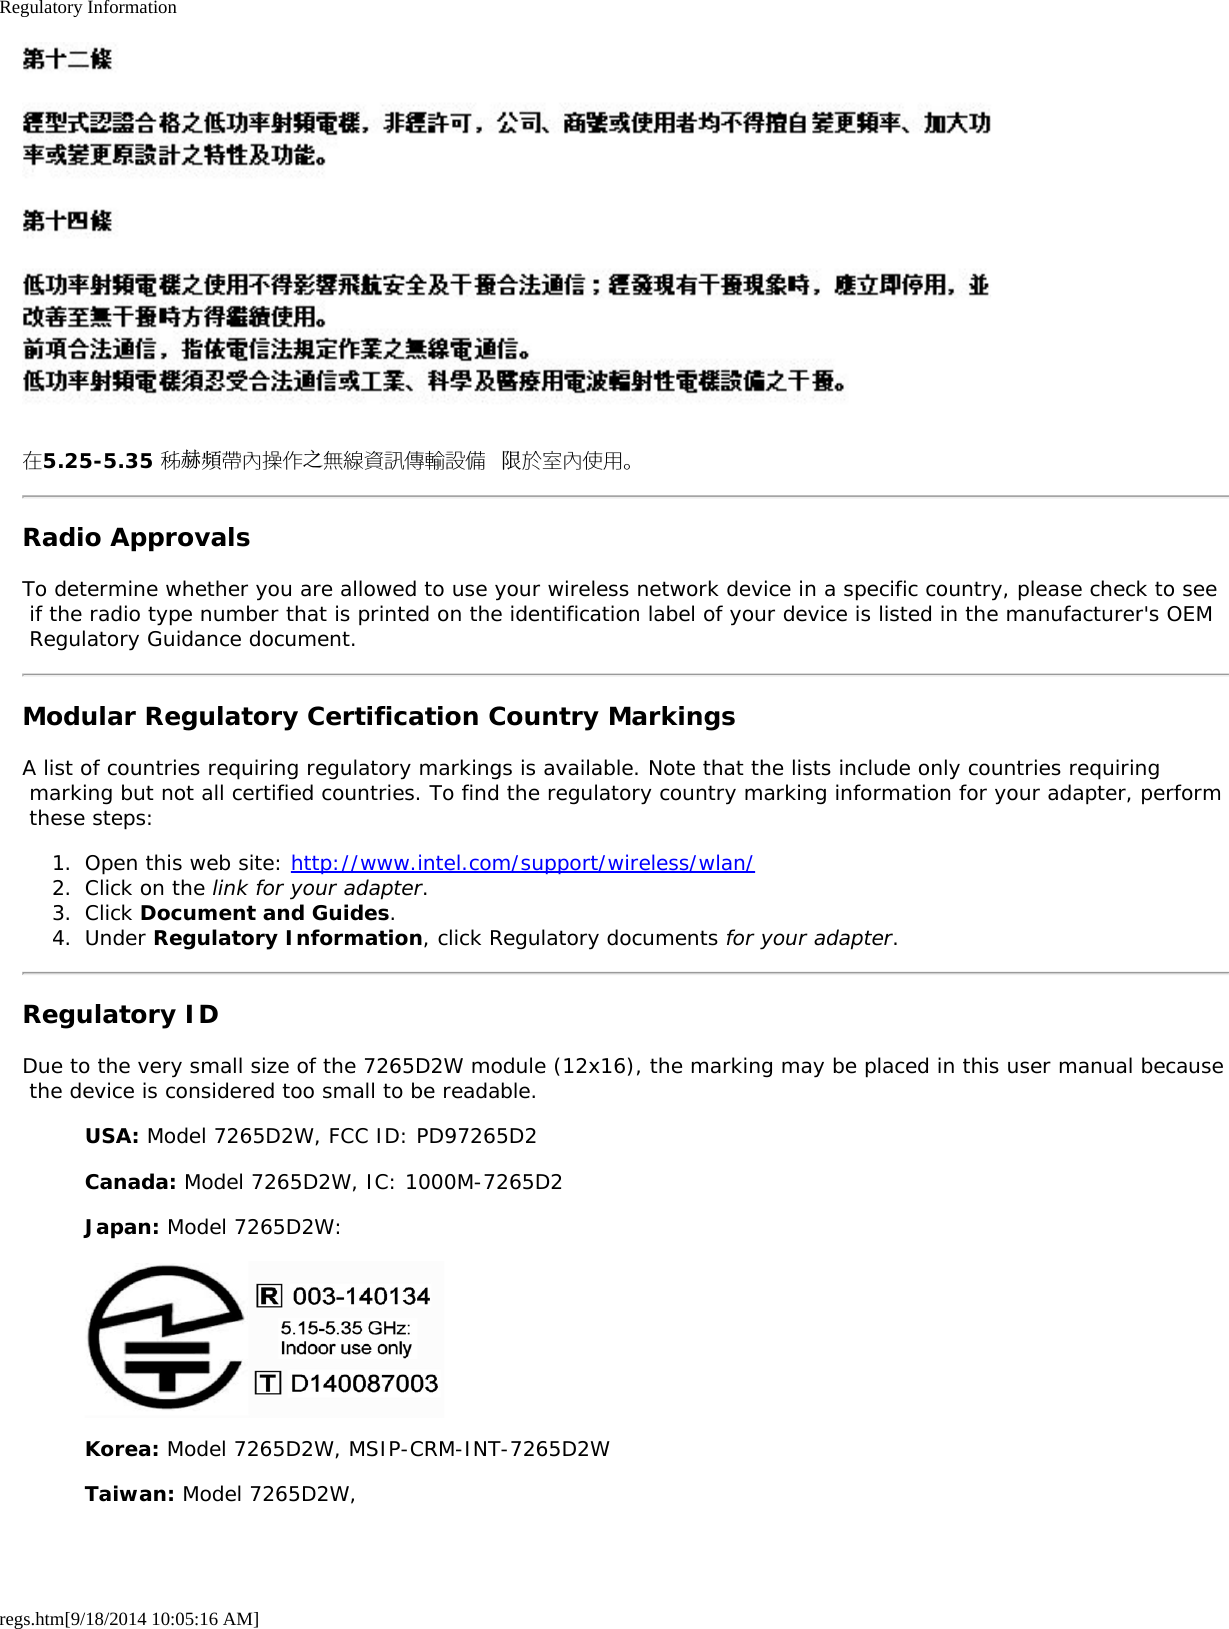 Regulatory Informationregs.htm[9/18/2014 10:05:16 AM]在5.25-5.35 秭赫頻帶內操作之無線資訊傳輸設備 限於室內使用。Radio ApprovalsTo determine whether you are allowed to use your wireless network device in a specific country, please check to see if the radio type number that is printed on the identification label of your device is listed in the manufacturer&apos;s OEM Regulatory Guidance document.Modular Regulatory Certification Country MarkingsA list of countries requiring regulatory markings is available. Note that the lists include only countries requiring marking but not all certified countries. To find the regulatory country marking information for your adapter, perform these steps:1.  Open this web site: http://www.intel.com/support/wireless/wlan/2.  Click on the link for your adapter.3.  Click Document and Guides.4.  Under Regulatory Information, click Regulatory documents for your adapter.Regulatory IDDue to the very small size of the 7265D2W module (12x16), the marking may be placed in this user manual because the device is considered too small to be readable.USA: Model 7265D2W, FCC ID: PD97265D2Canada: Model 7265D2W, IC: 1000M-7265D2Japan: Model 7265D2W:Korea: Model 7265D2W, MSIP-CRM-INT-7265D2WTaiwan: Model 7265D2W,